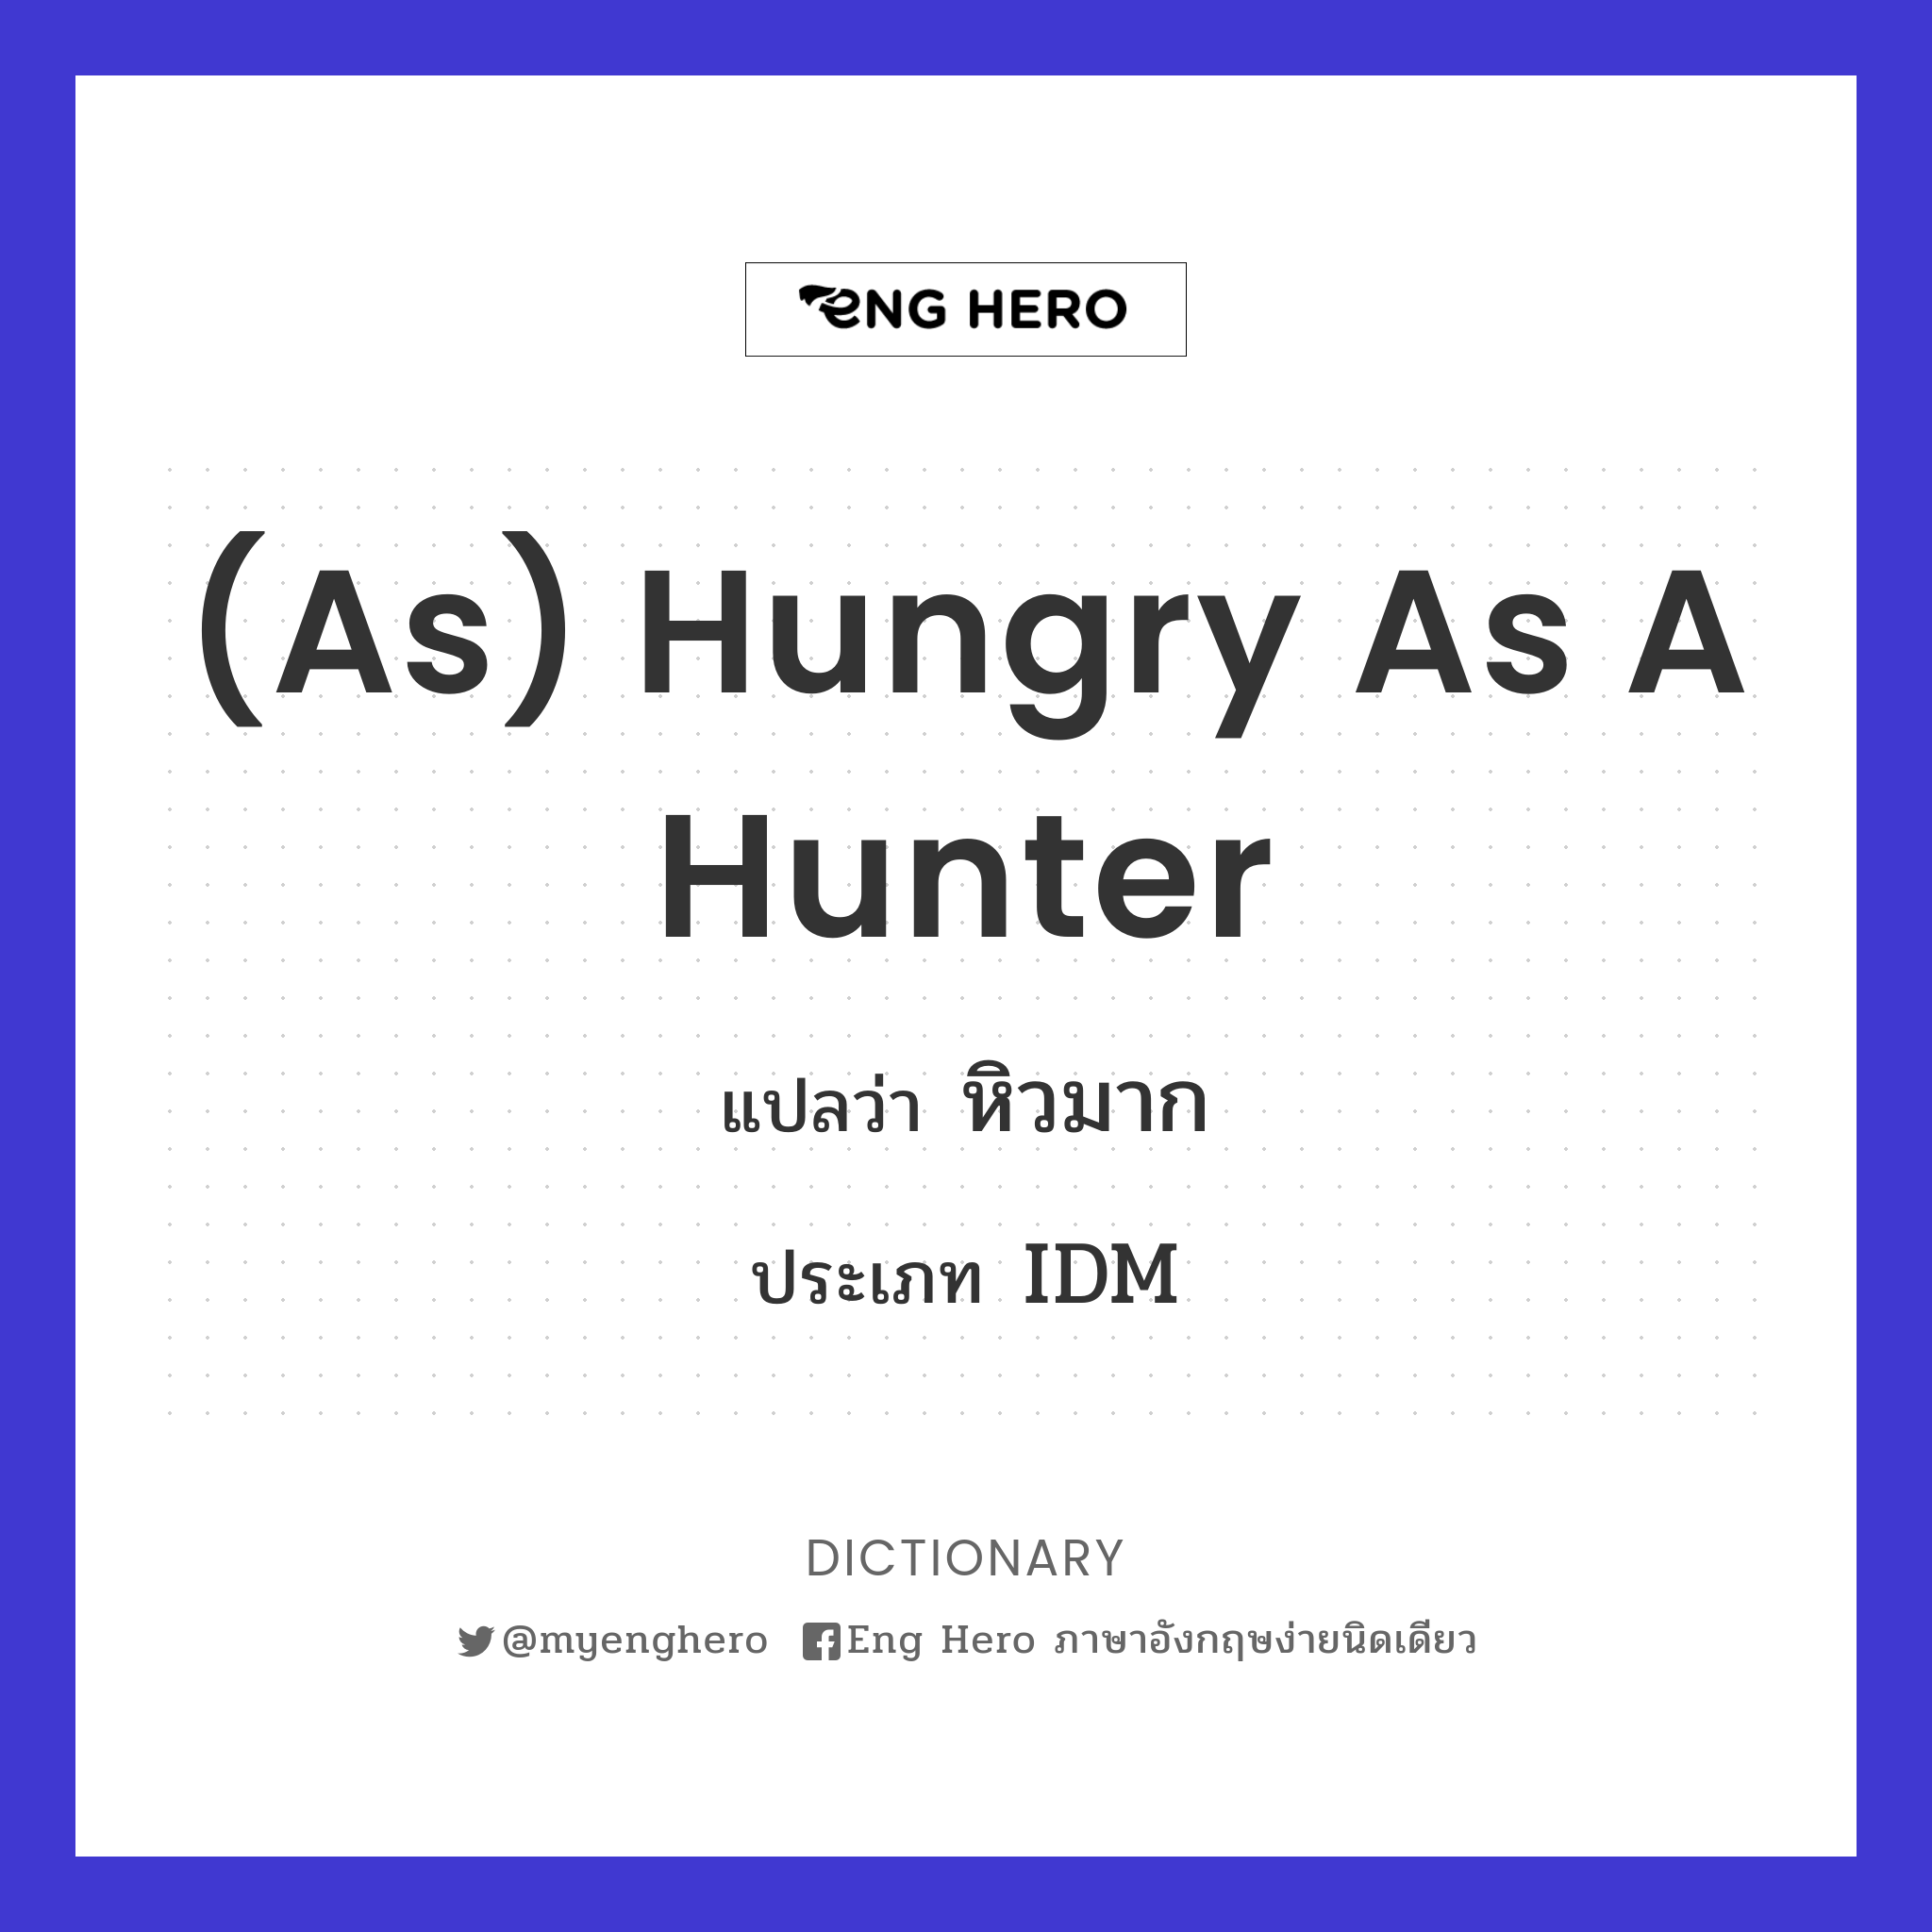 (as) hungry as a hunter